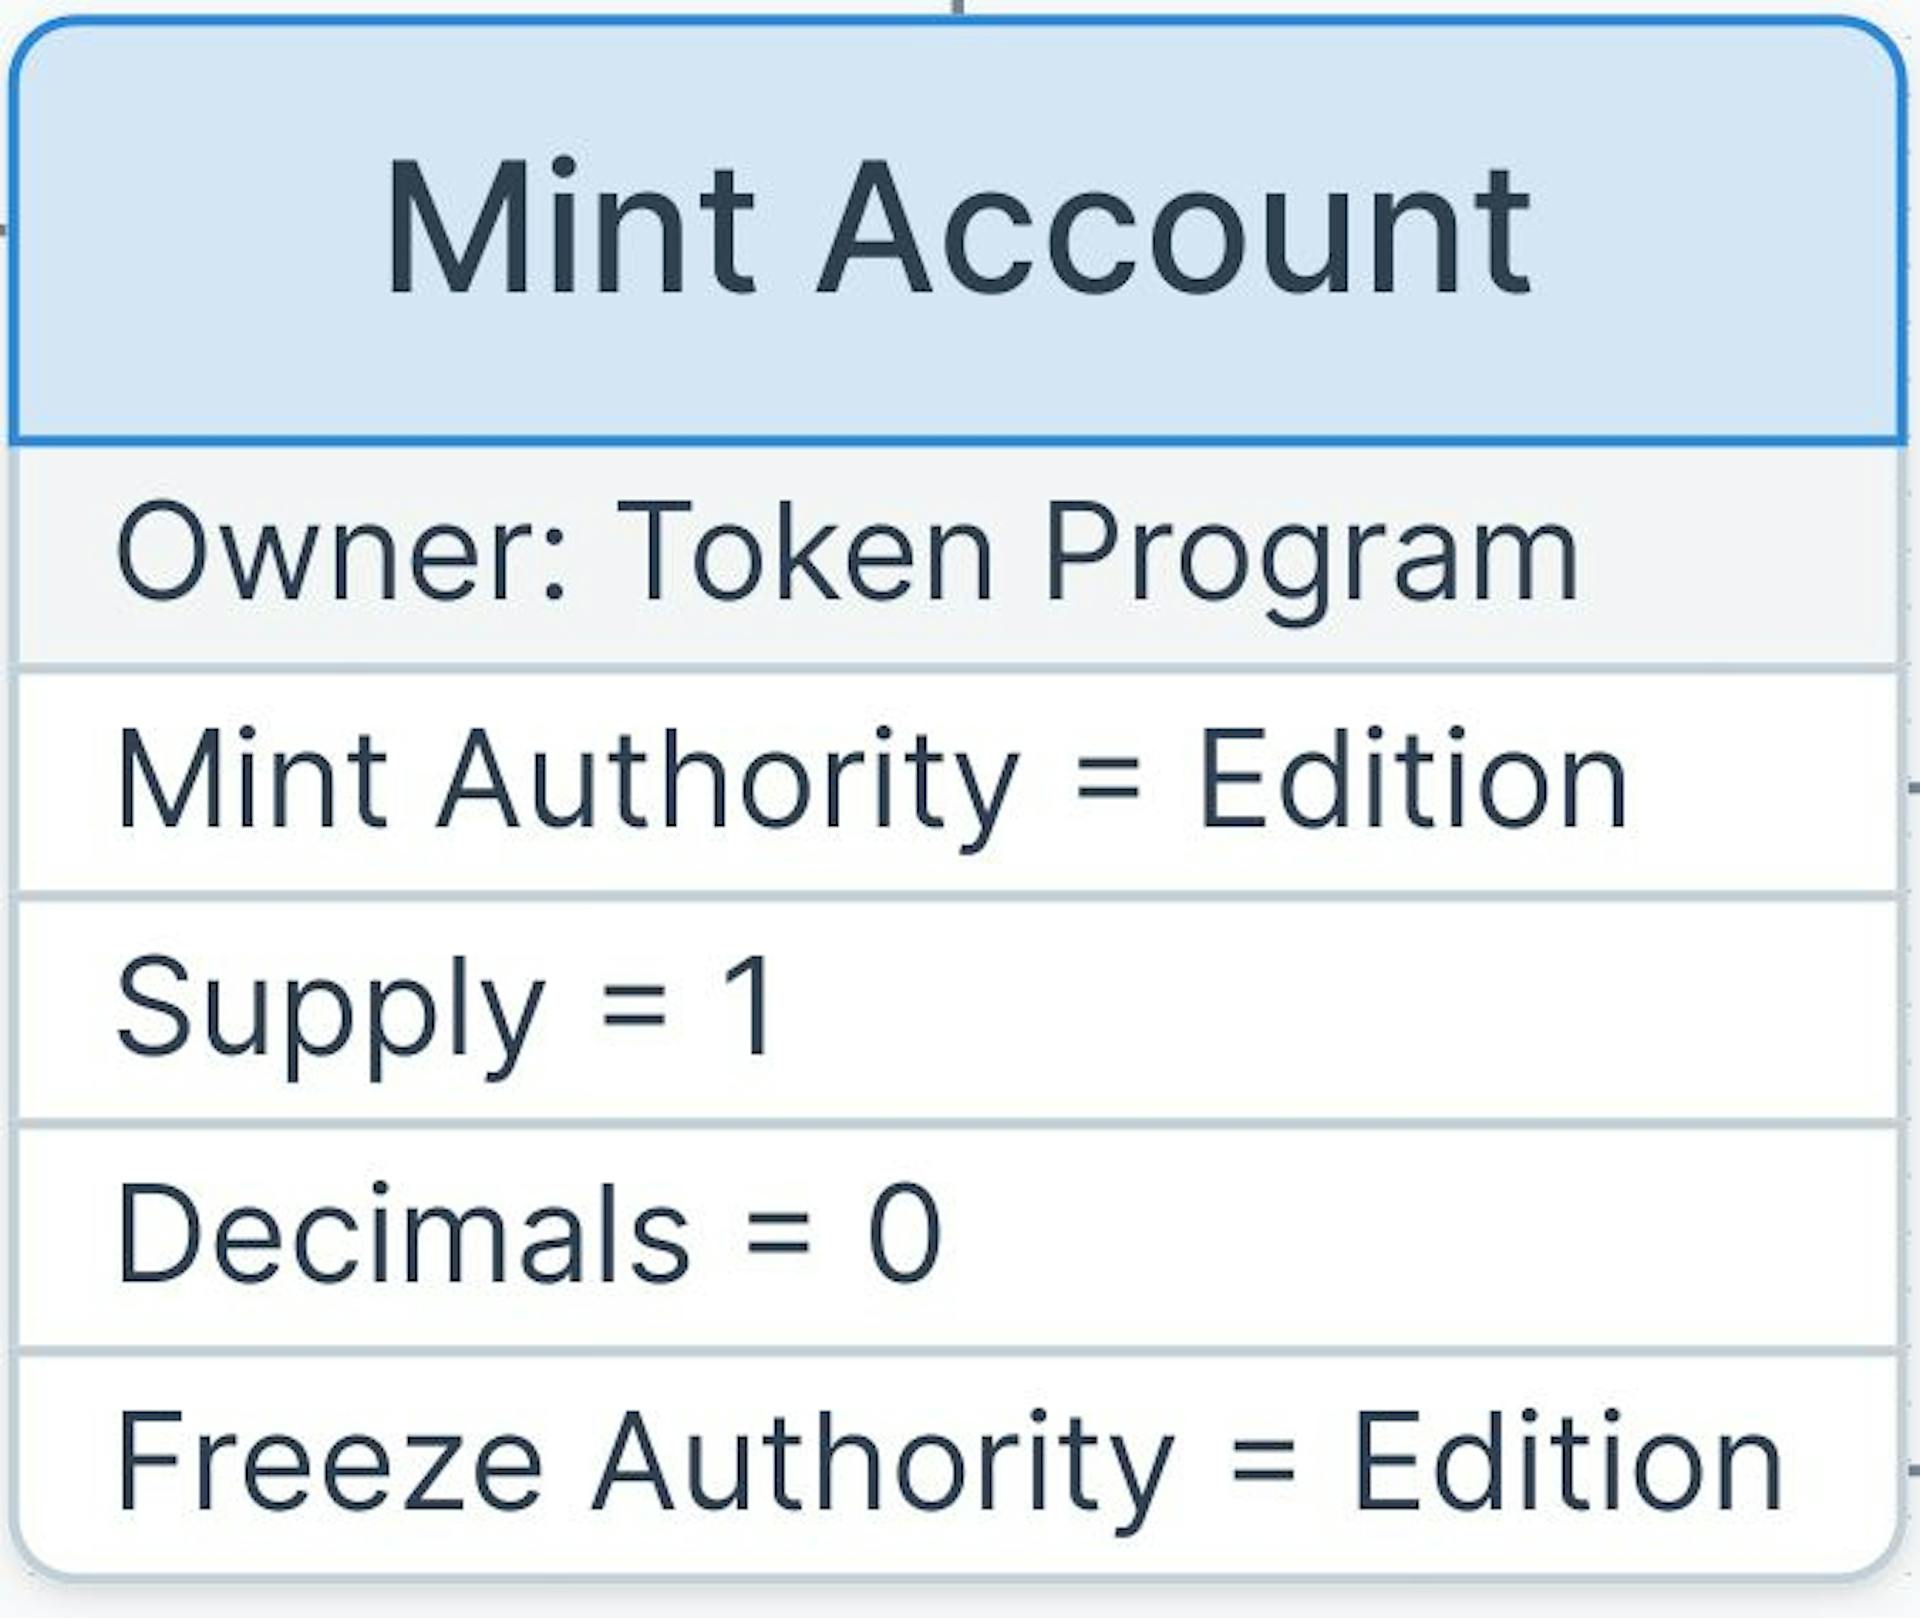 The Mint Account